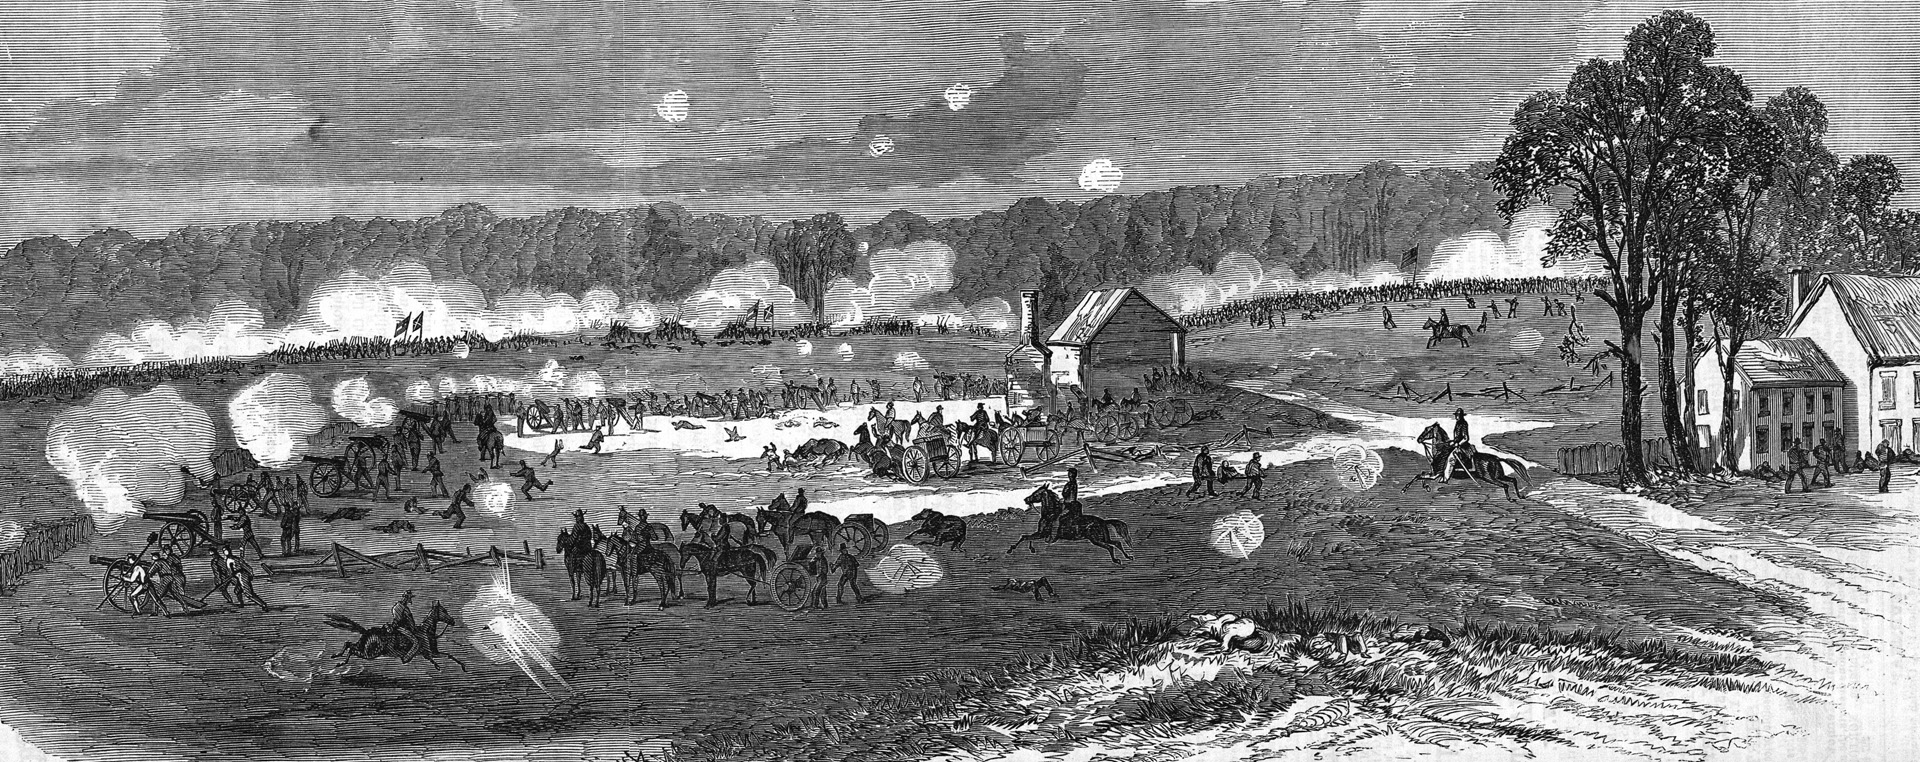 Union artillery fires on the enemy on the first day of the battle. When Hooker’s troops ran into large numbers of Confederates moving west to check his advance toward Fredricksburg, he ordered them to fall back to Chancellorsville, thus relinquishing the initiative to General Robert E. Lee.